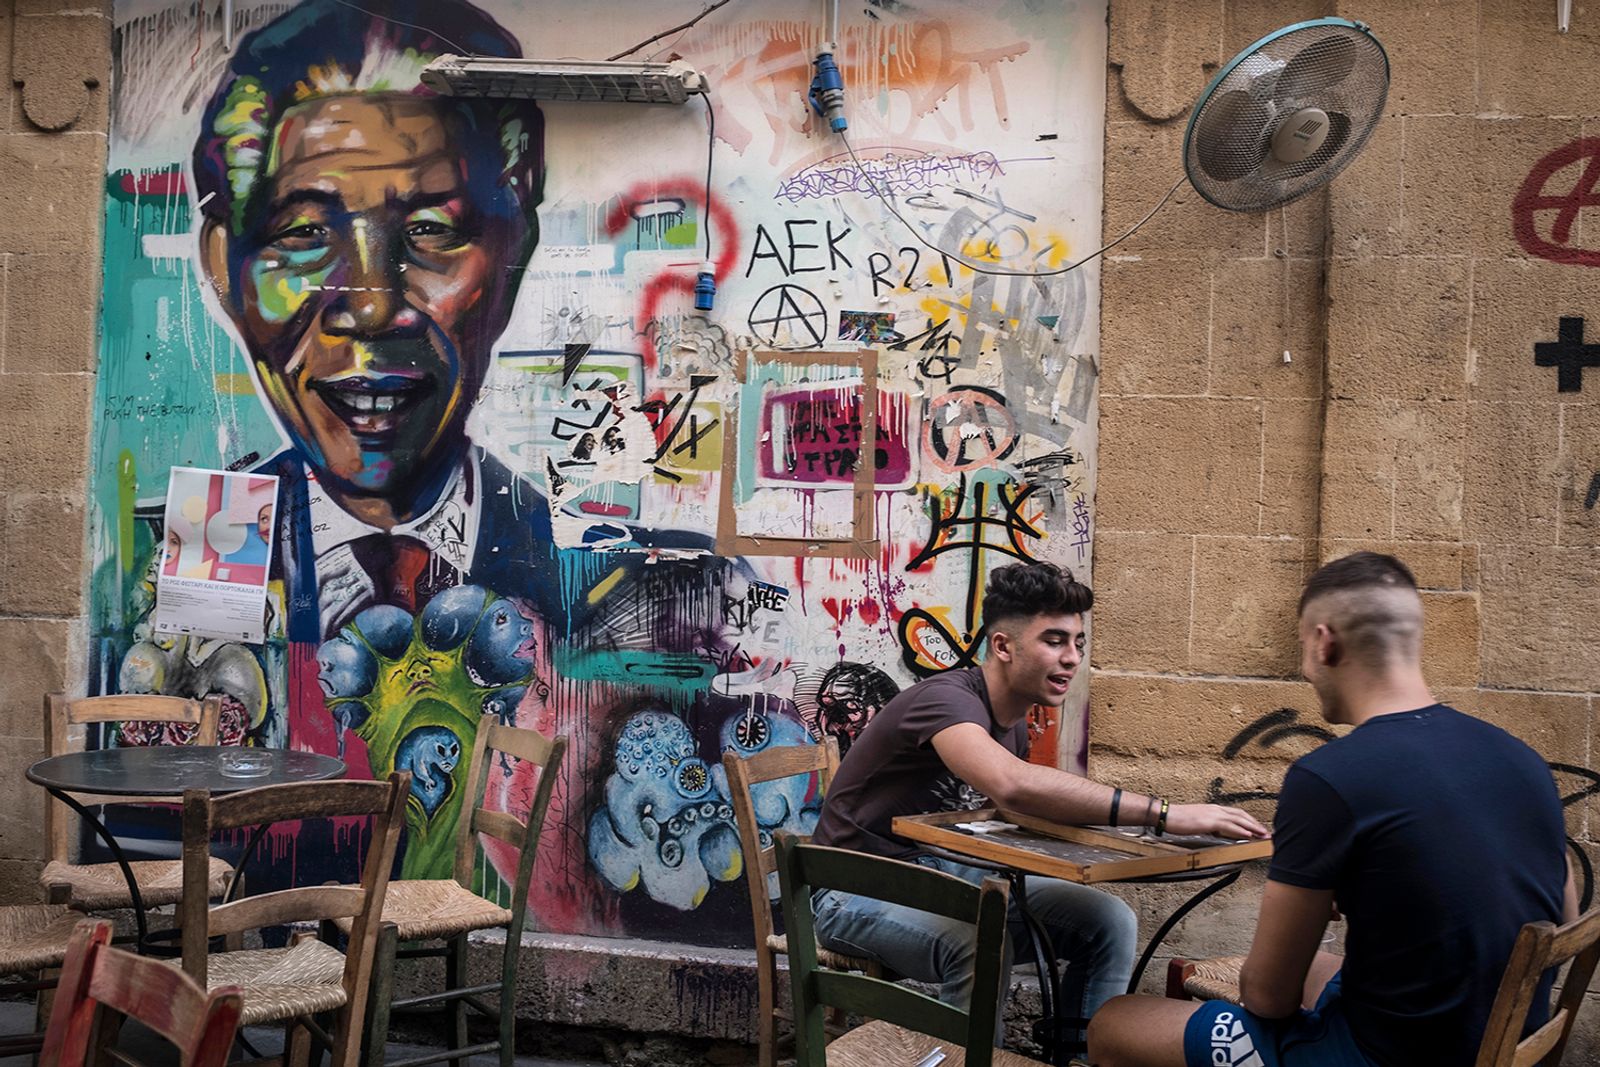 © Sahan Nuhoglu - Two Cypriot youngsters are playing black gammon in front of a Mandela mural in the city of Nicosia, Cyprus.